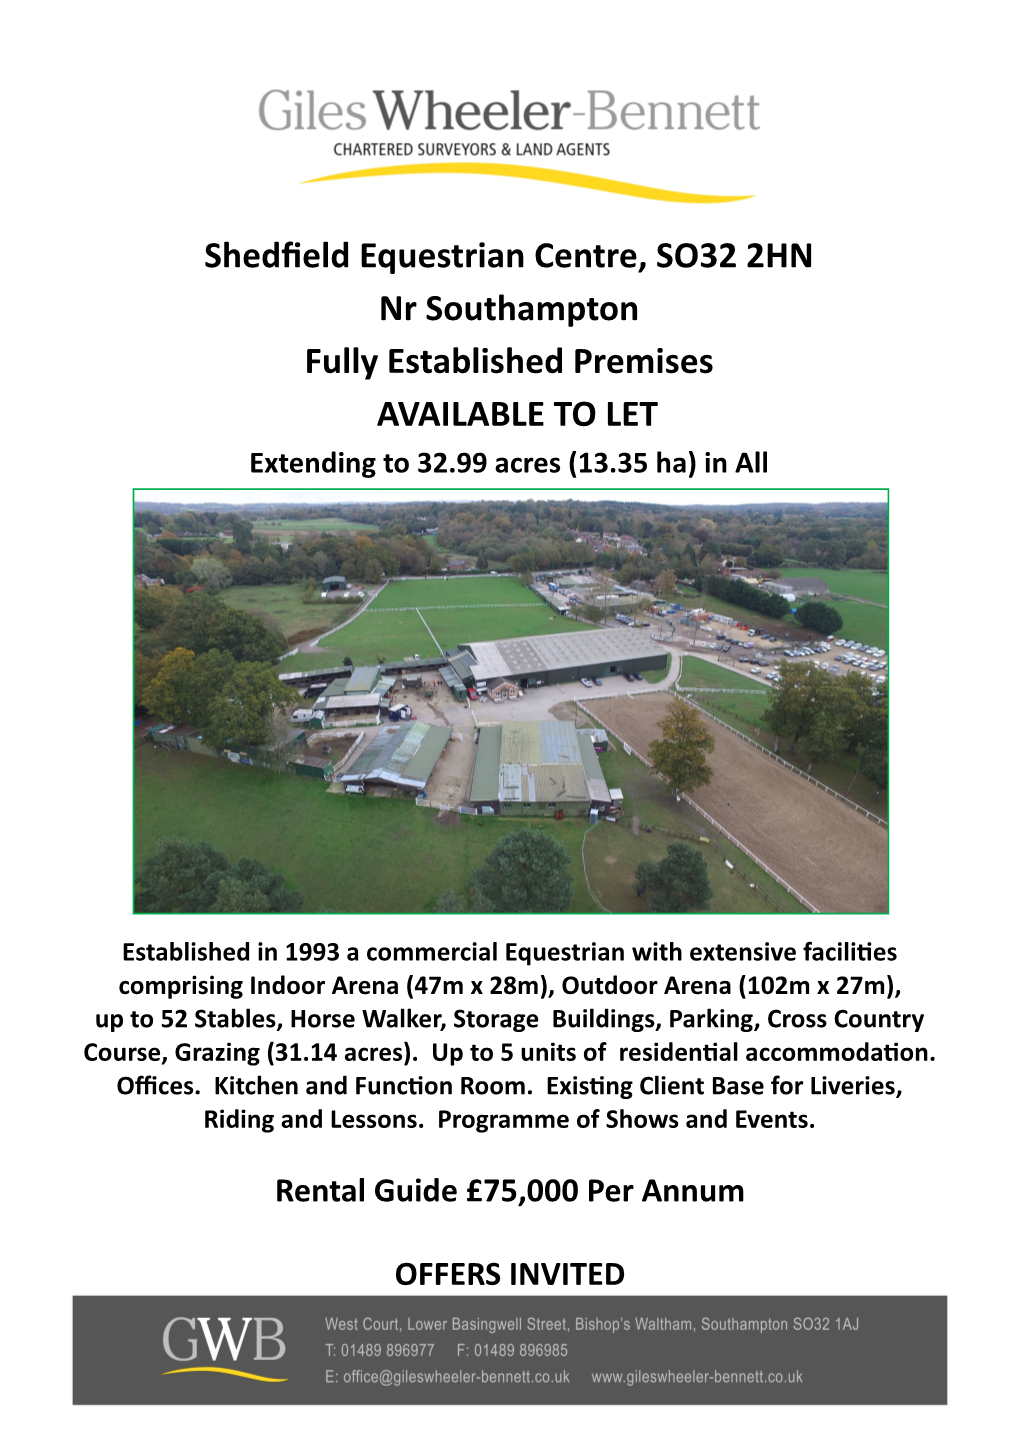 Shedfield Equestrian Centre, SO32 2HN Nr Southampton Fully Established Premises AVAILABLE to LET Extending to 32.99 Acres (13.35 Ha) in All